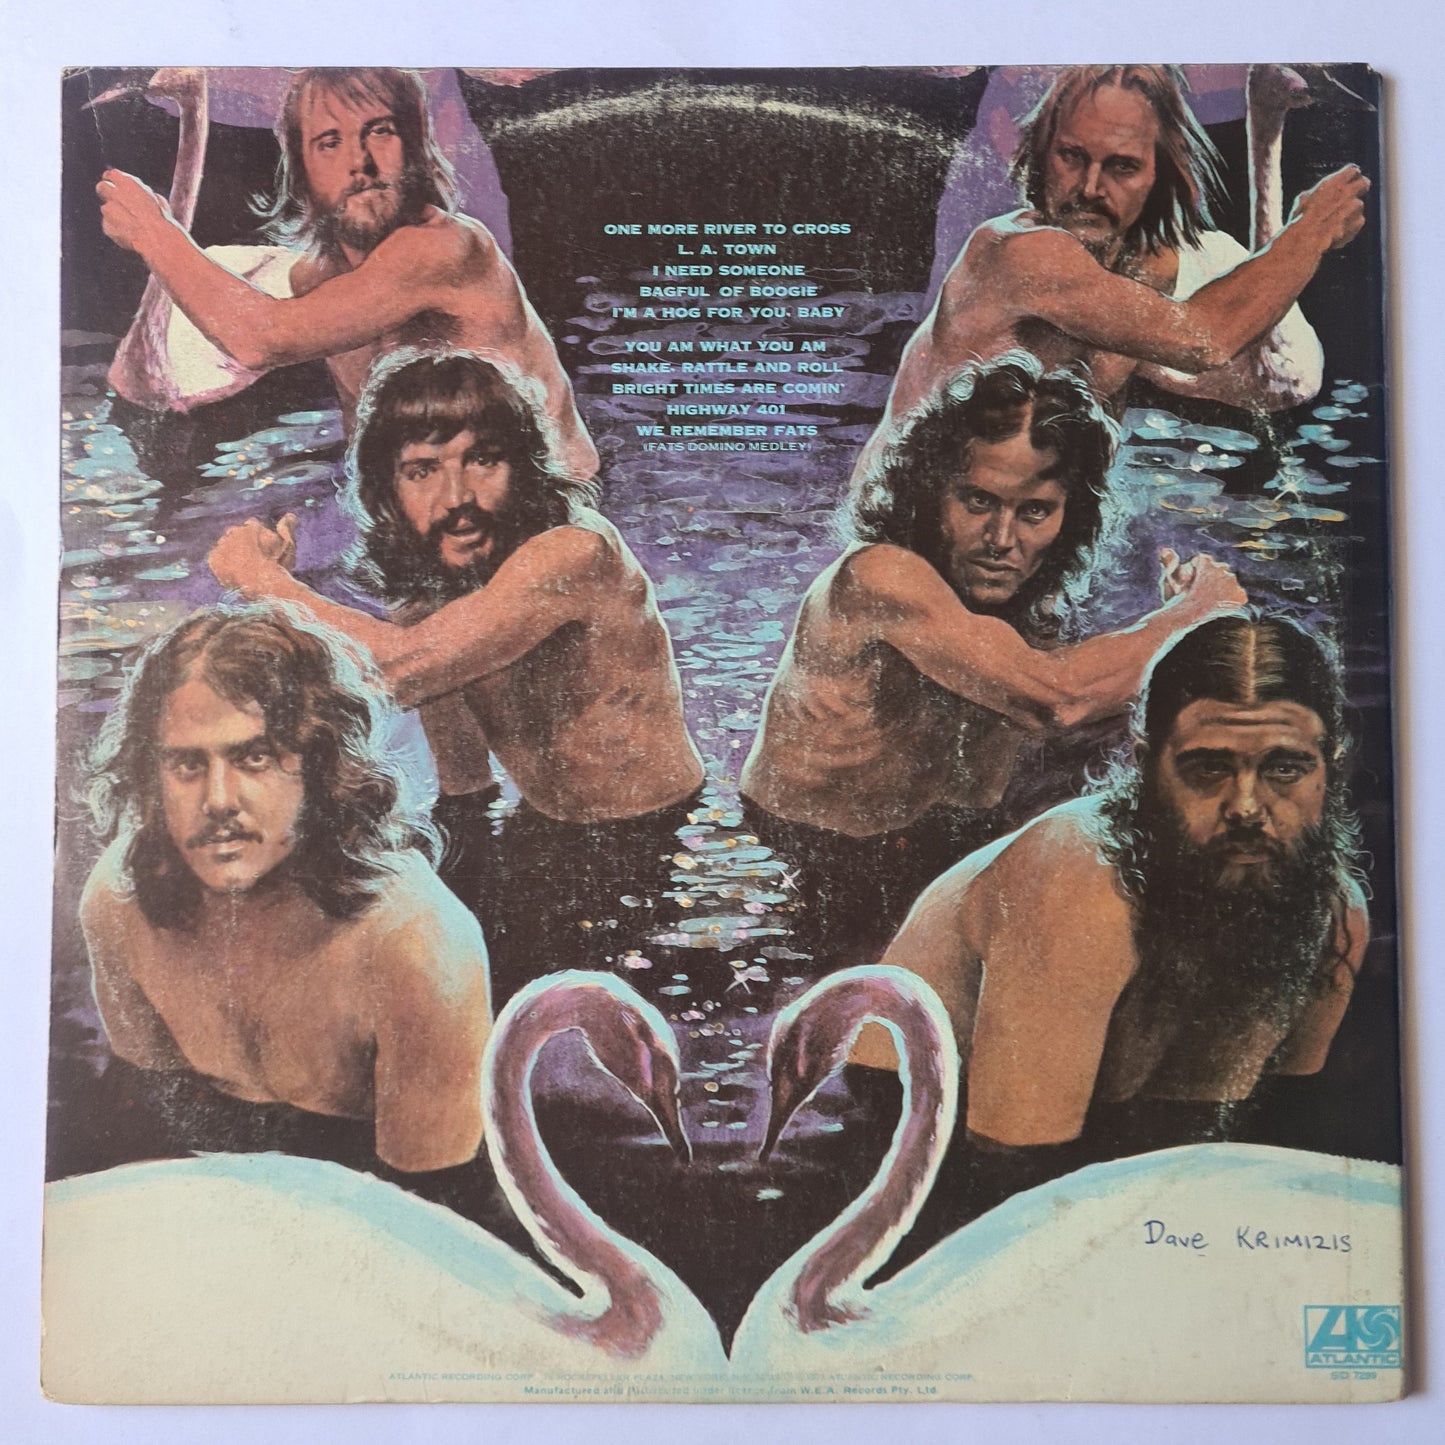 Canned Heat – One More River To Cross - 1973 (Gatefold) - Vinyl Record LP